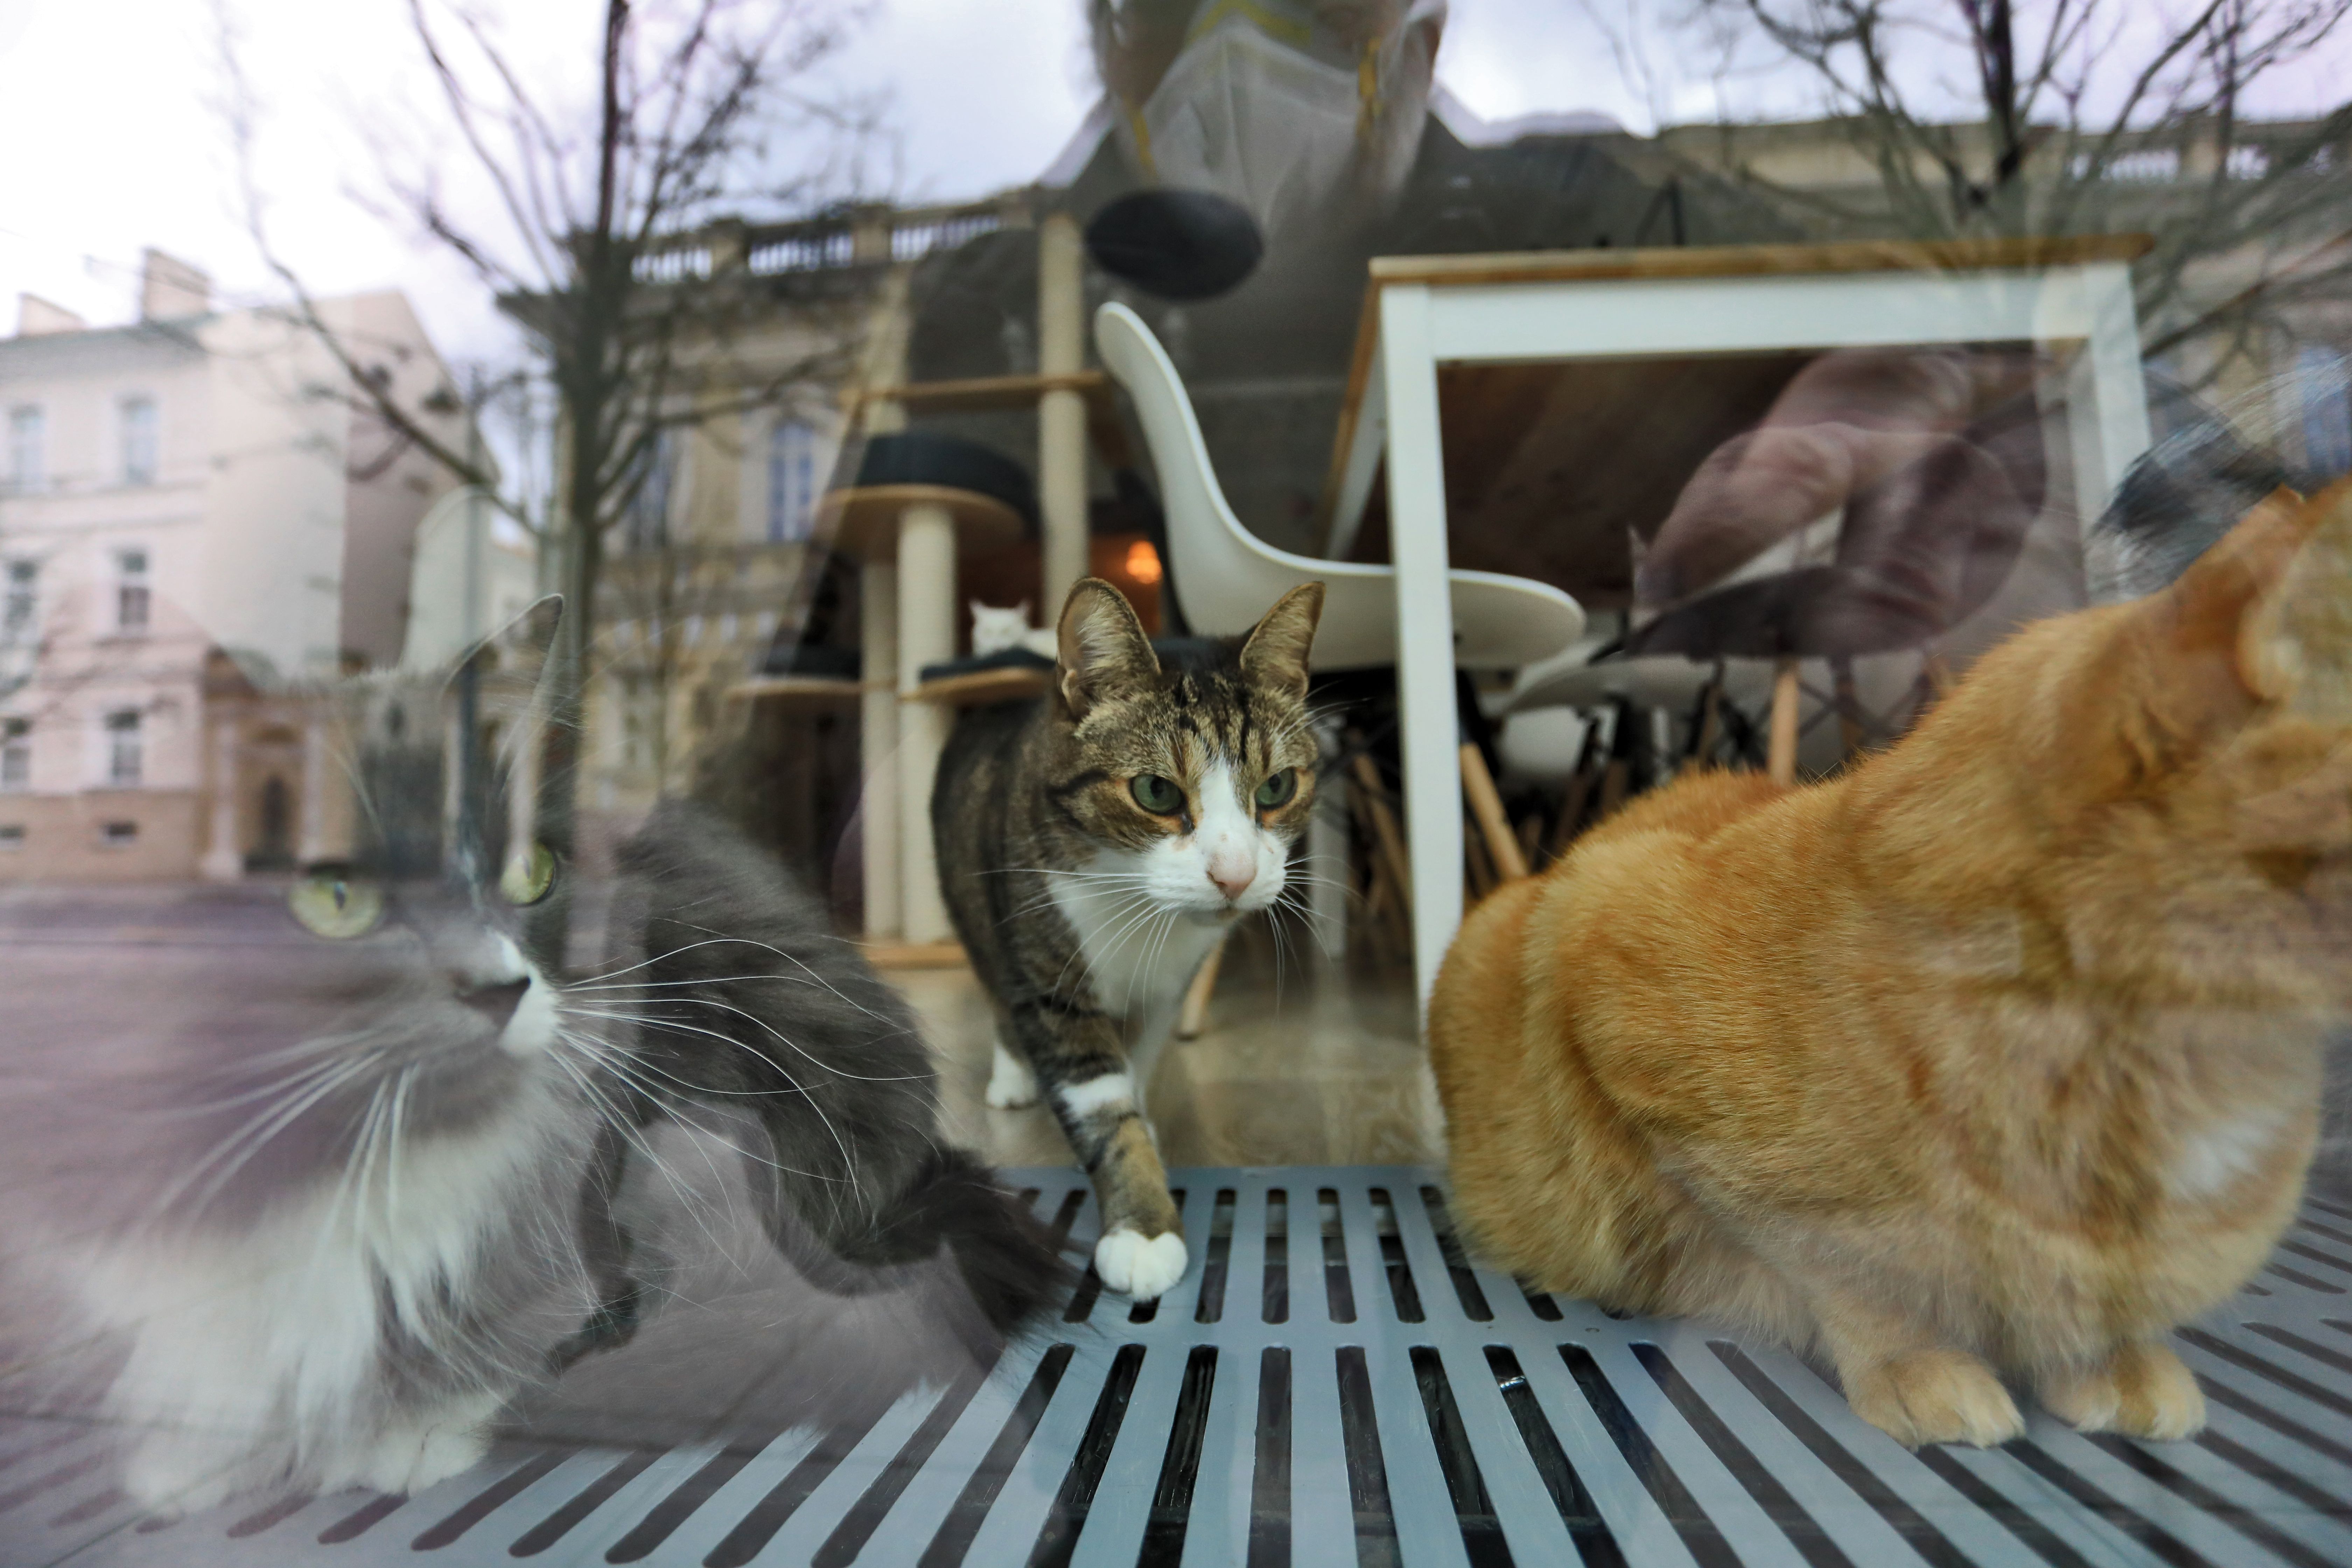 Cats are seen as they rest behind the window of the "Cat Cafe" which remains closed in Vilnius, Lithuania on April 19, 2020, amid the new coronavirus COVID-19 pandemic. (Photo by PETRAS MALUKAS/AFP via Getty Images)